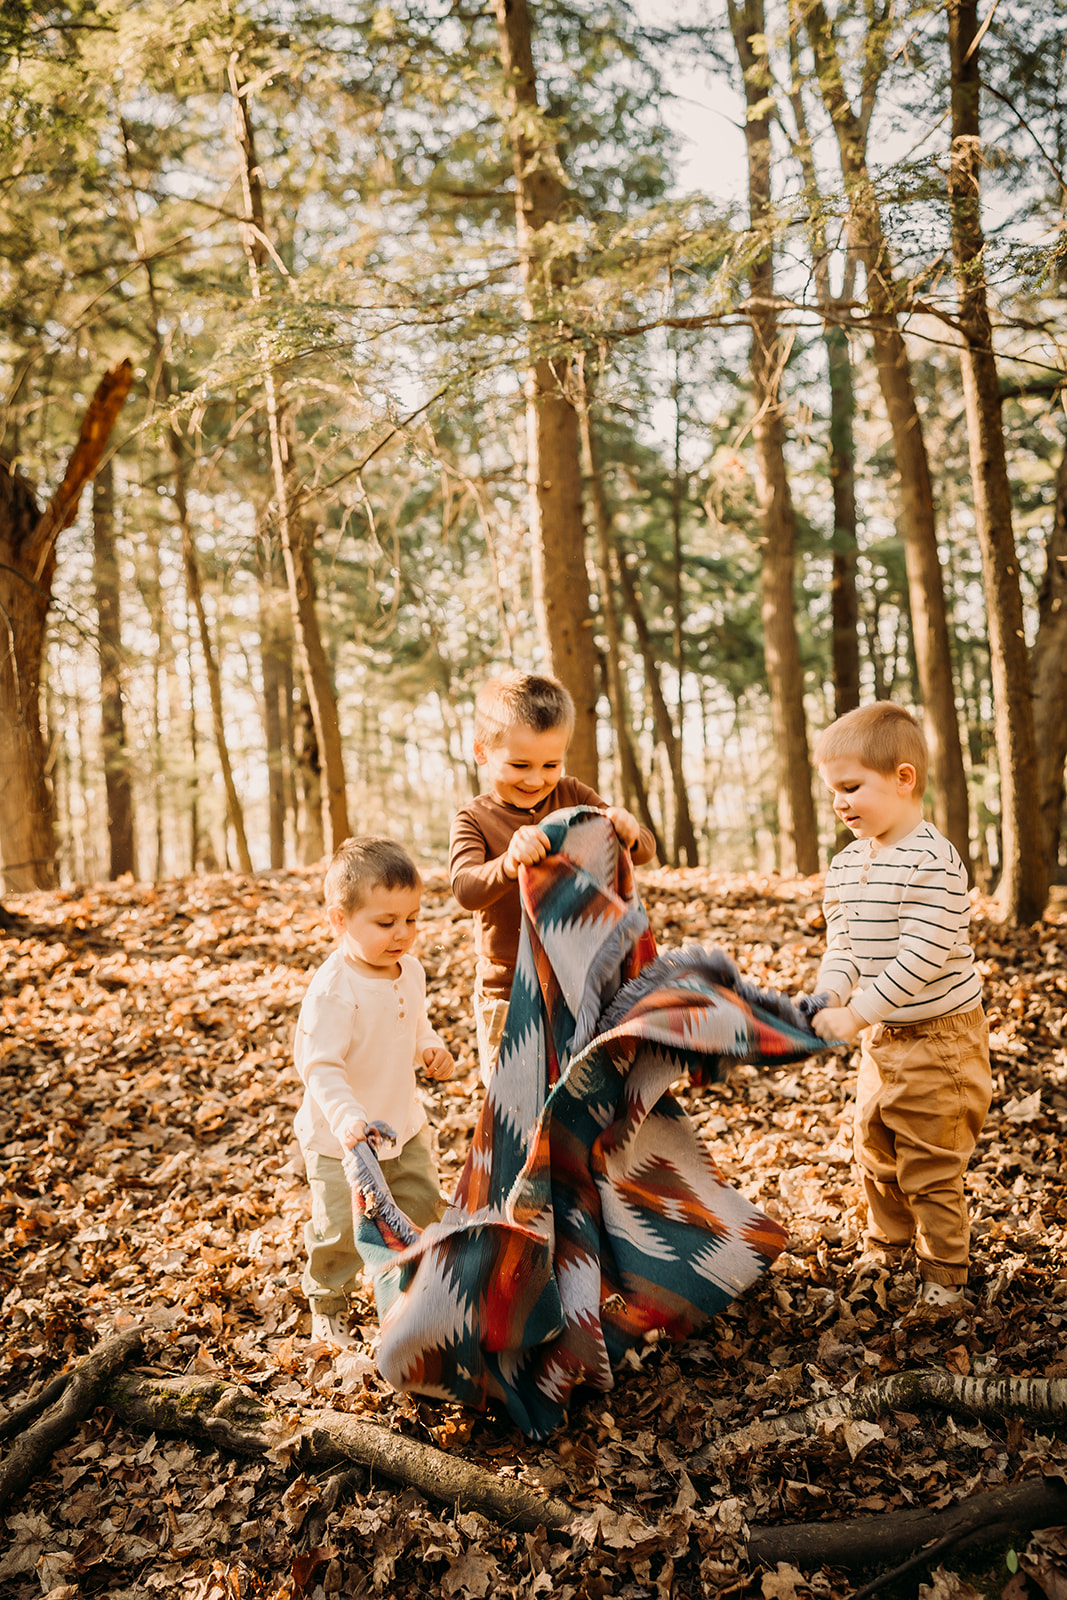 Scenic Ottawa Forest provides a magical backdrop for a family shoot